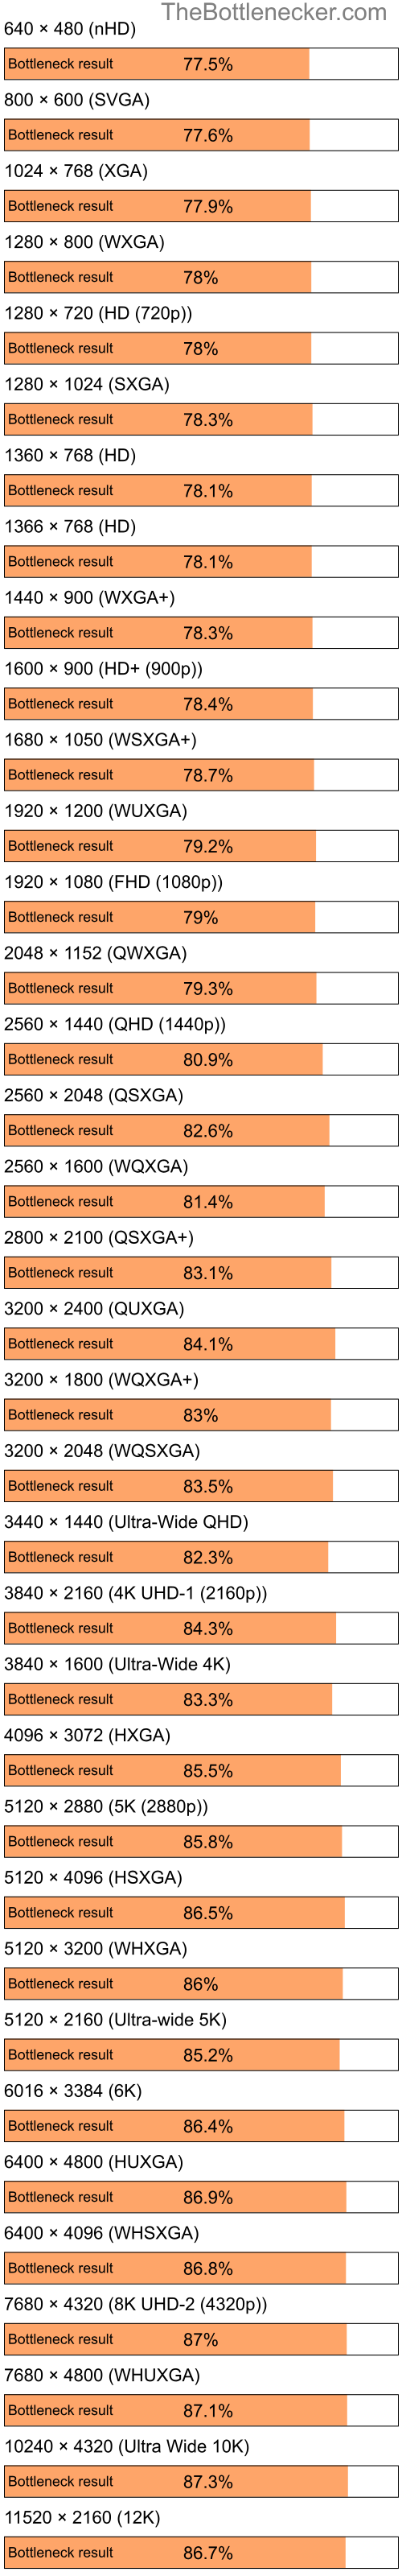 Bottleneck results by resolution for Intel Atom Z520 and AMD Mobility Radeon HD 2300 in Graphic Card Intense Tasks